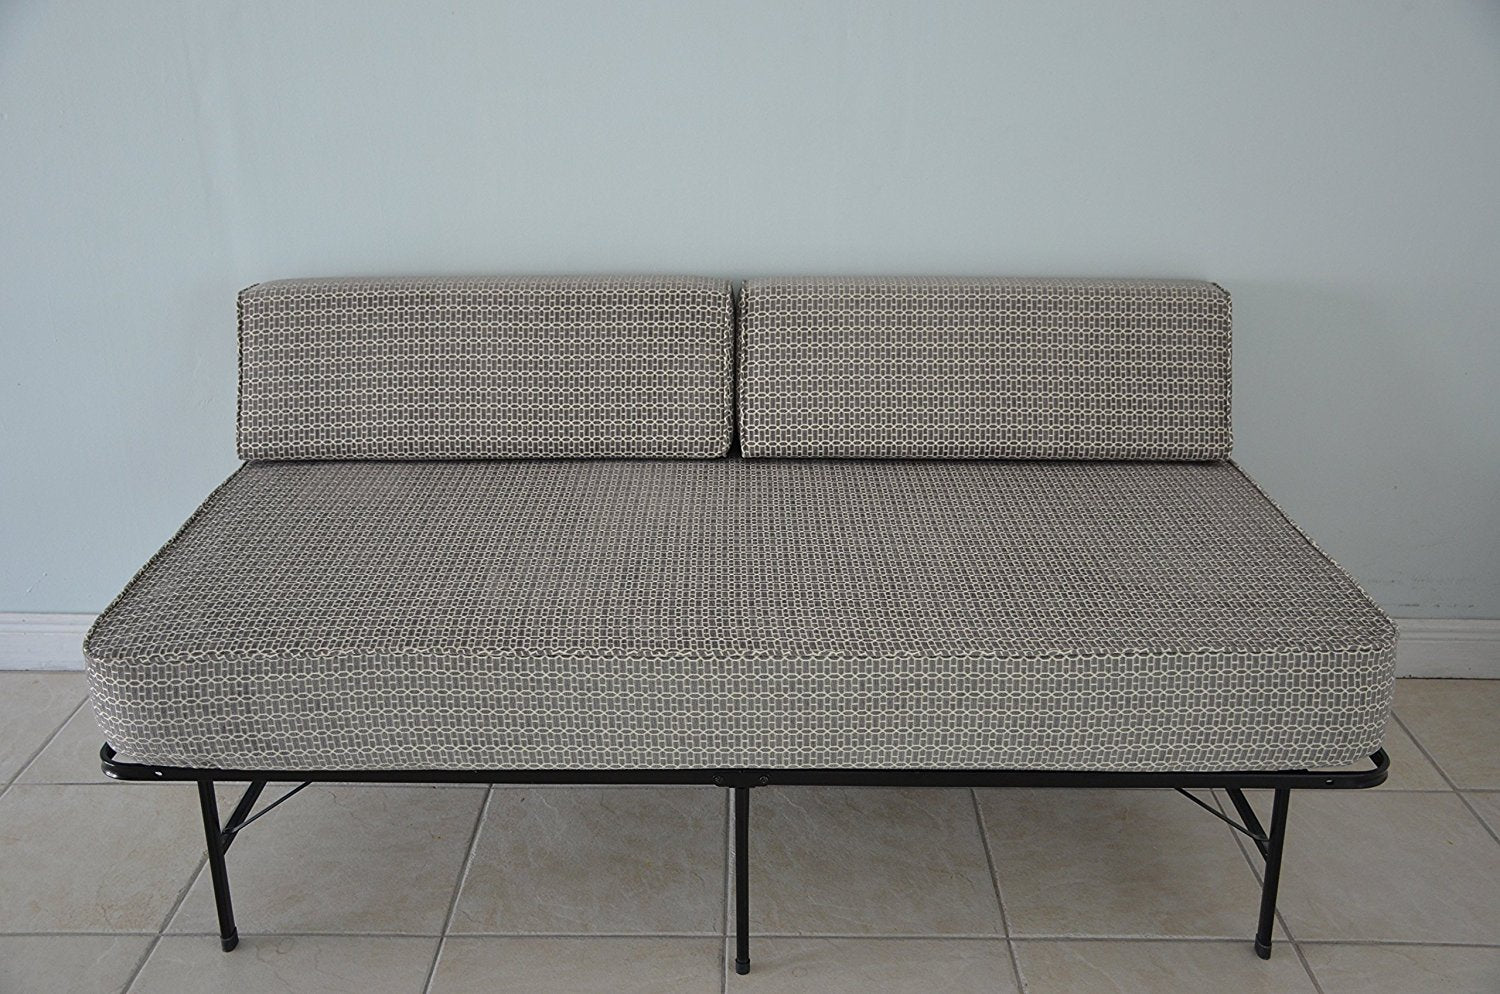 Daybed Fitted Cover (GTS 11912)